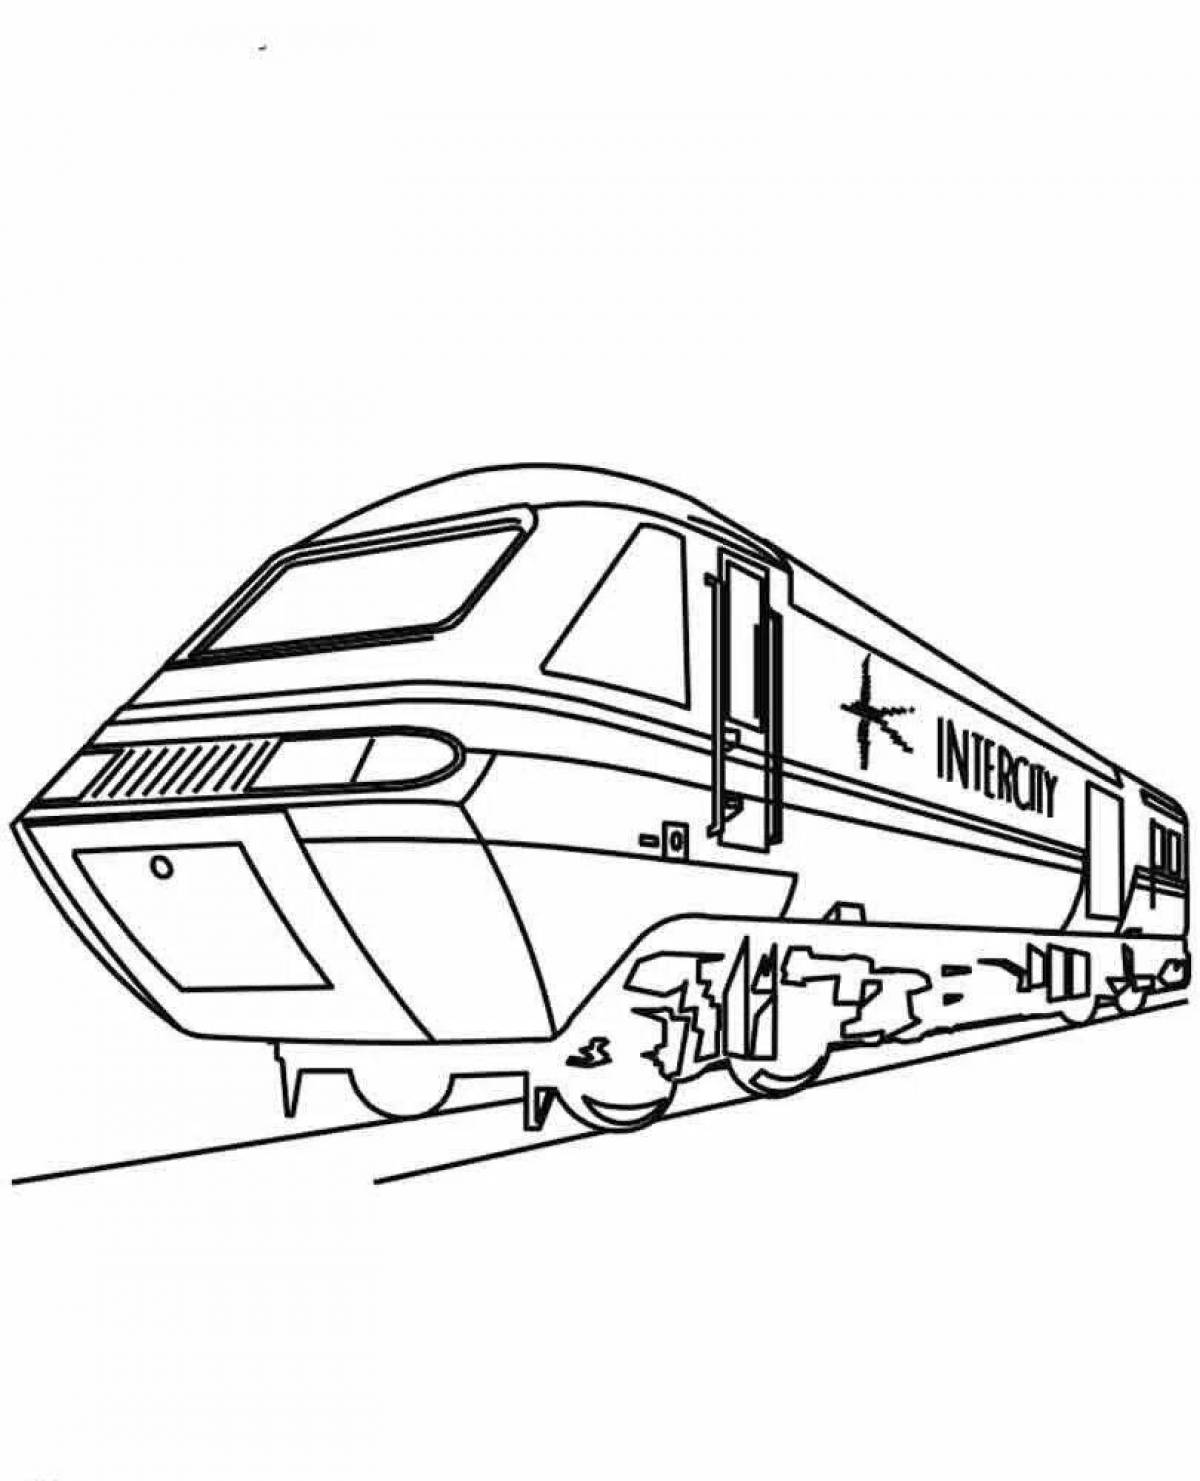 Mystical Aeroexpress Coloring Page